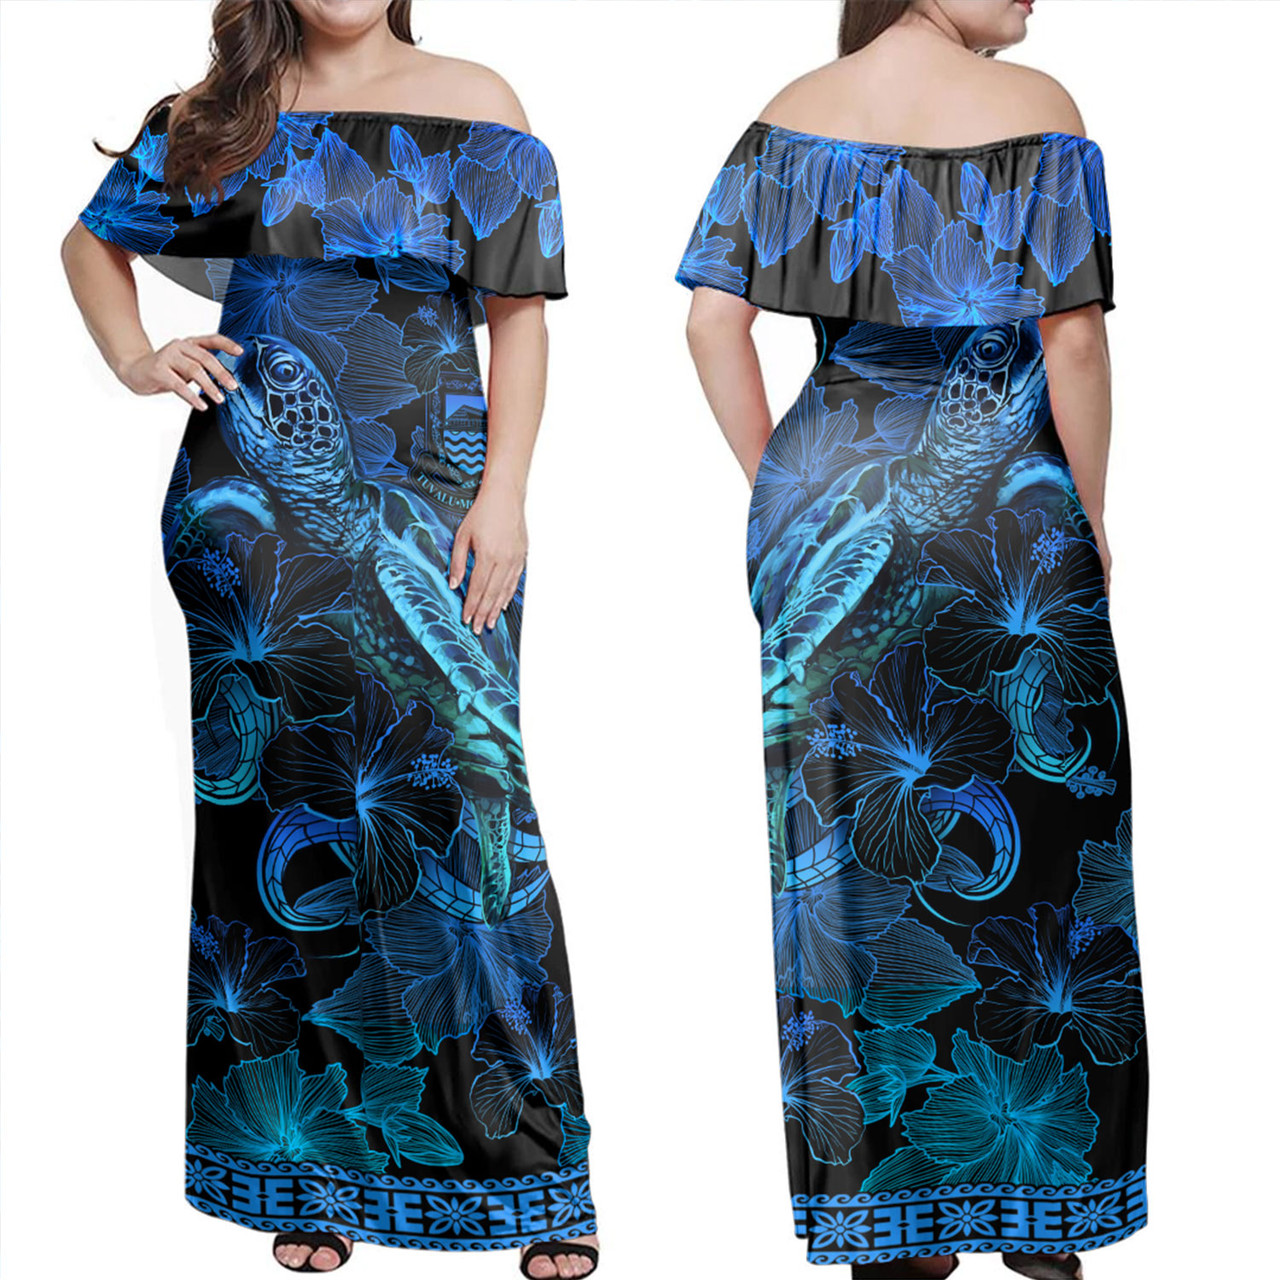 Tuvalu Combo Off Shoulder Long Dress And Shirt Sea Turtle With Blooming Hibiscus Flowers Tribal Blue